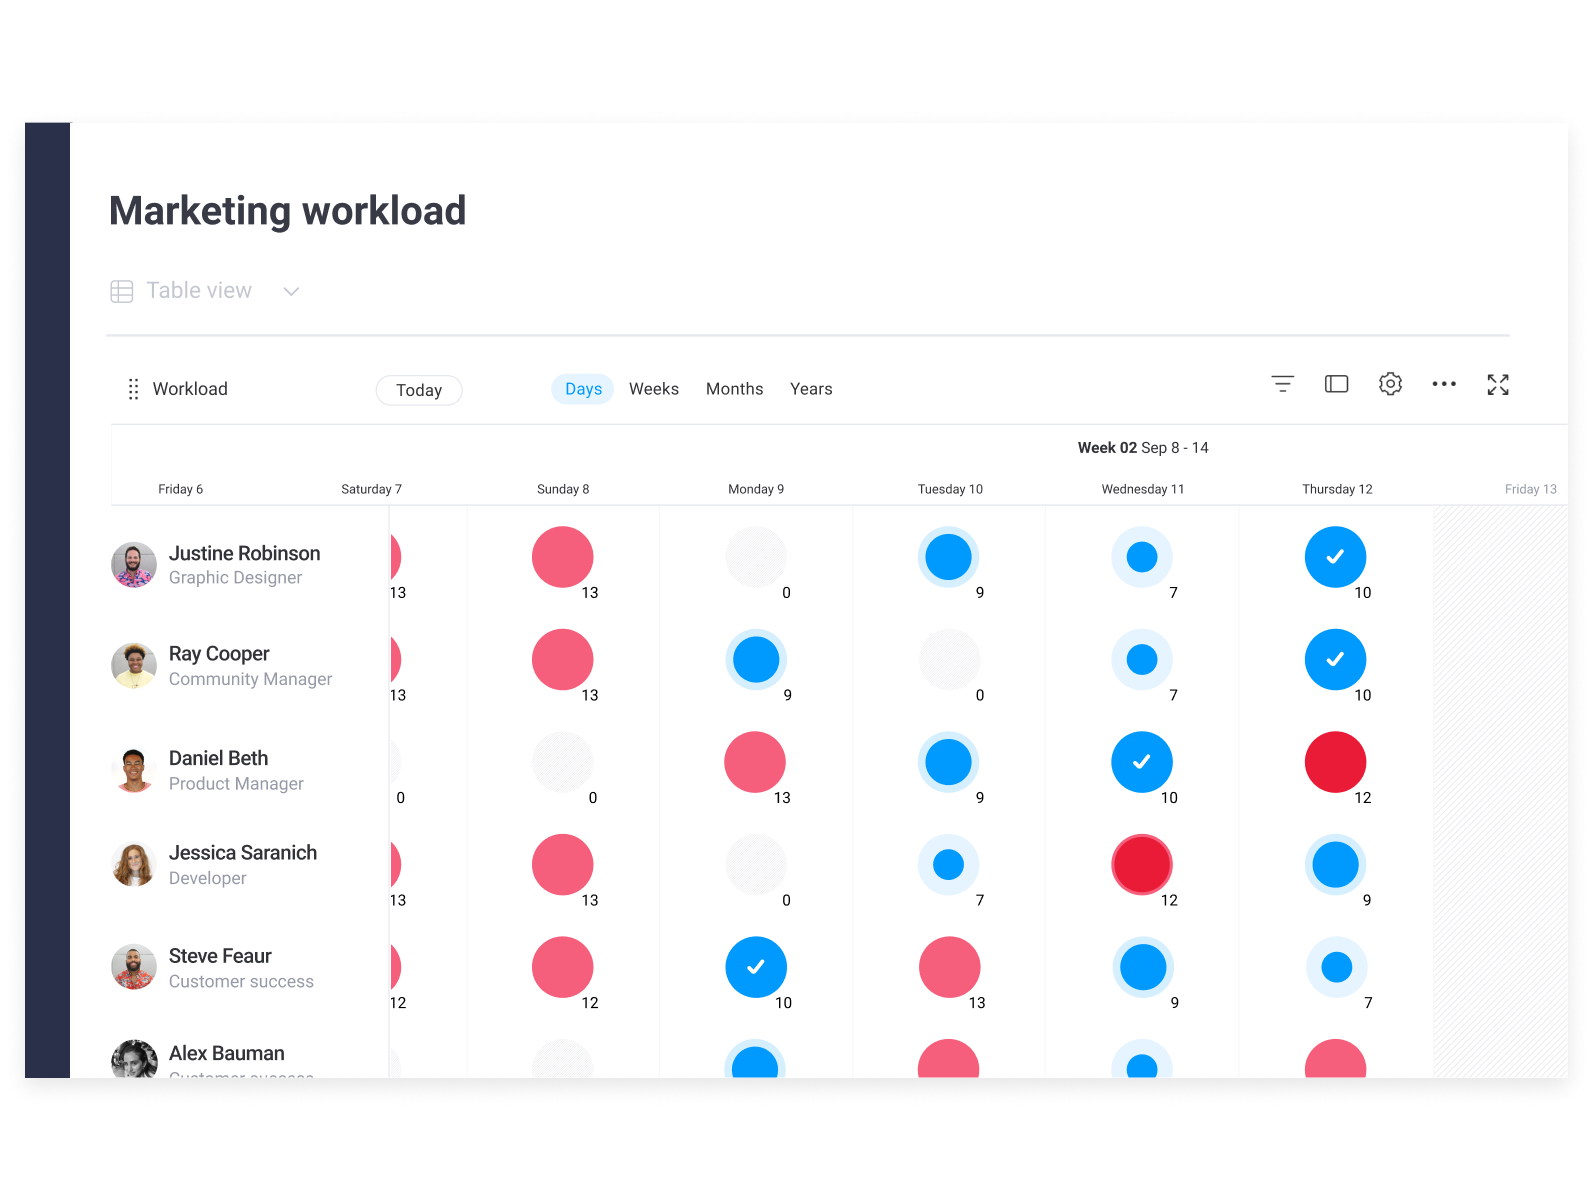 monday.com Software - A new way to manage your team's Workload!
Plan. Organize. Track. In one visual, collaborative space.